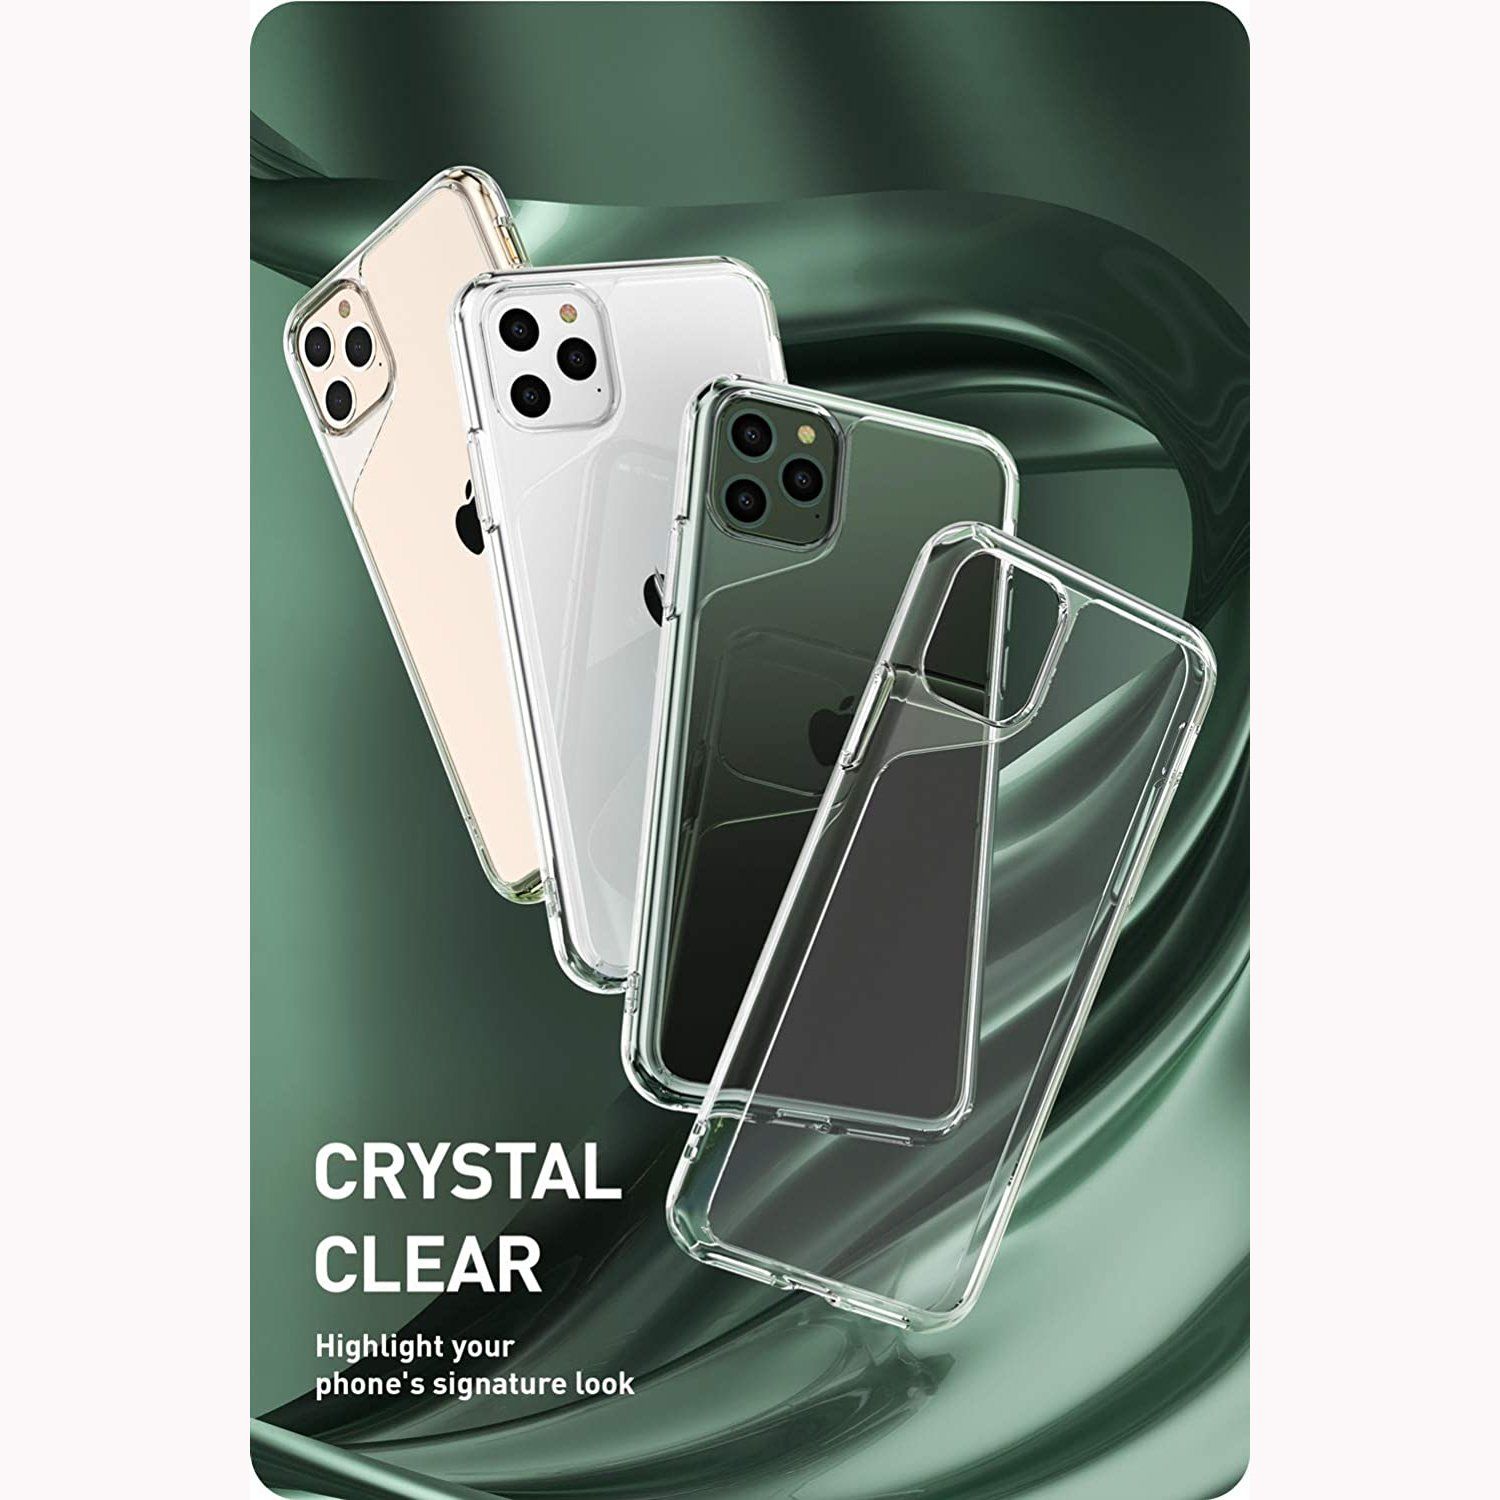 i-Blason Halo Series Scratch-Resistant Case for iPhone 11 Pro 5.8"(2019), Clear/Black iPhone Case i-Blason 